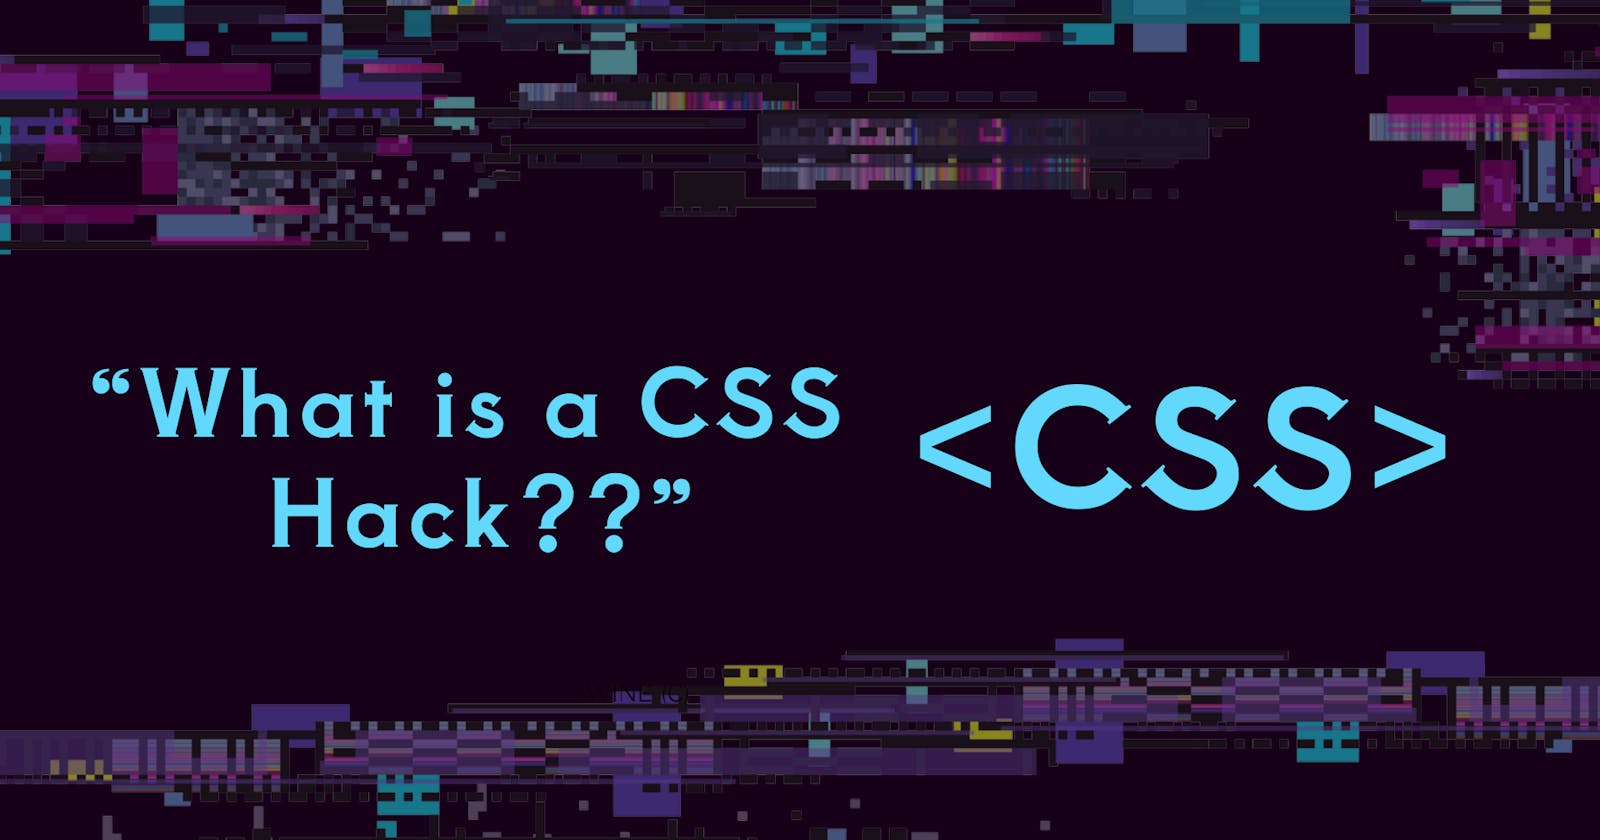 What is a CSS Hack?